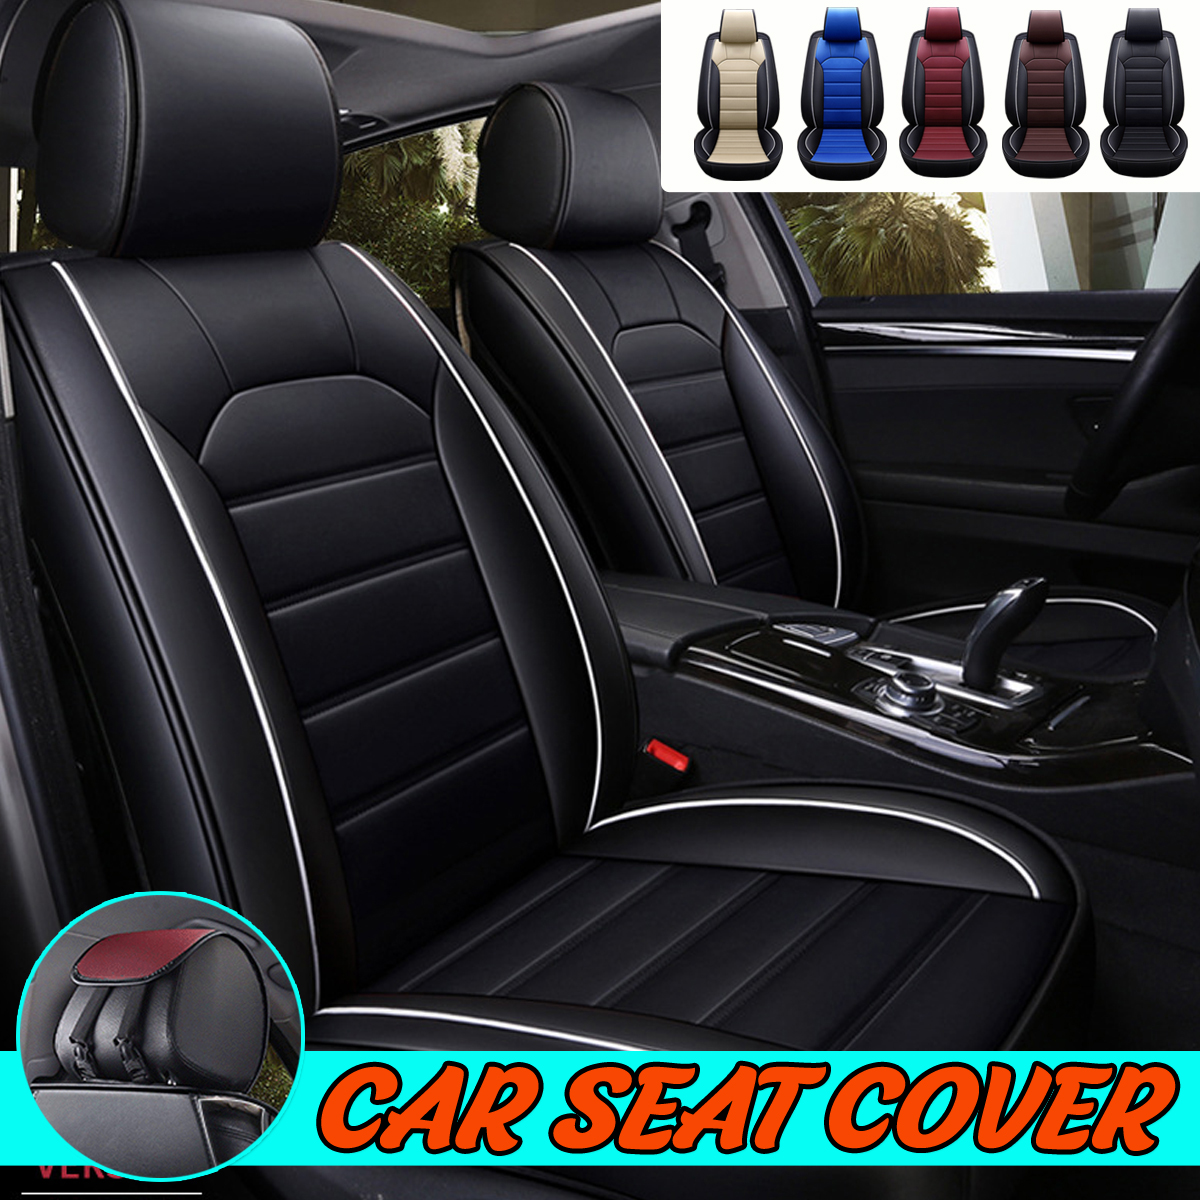 Other Seats & Seat Accessorries - 1 Pcs Universal PU Leather Car Seat